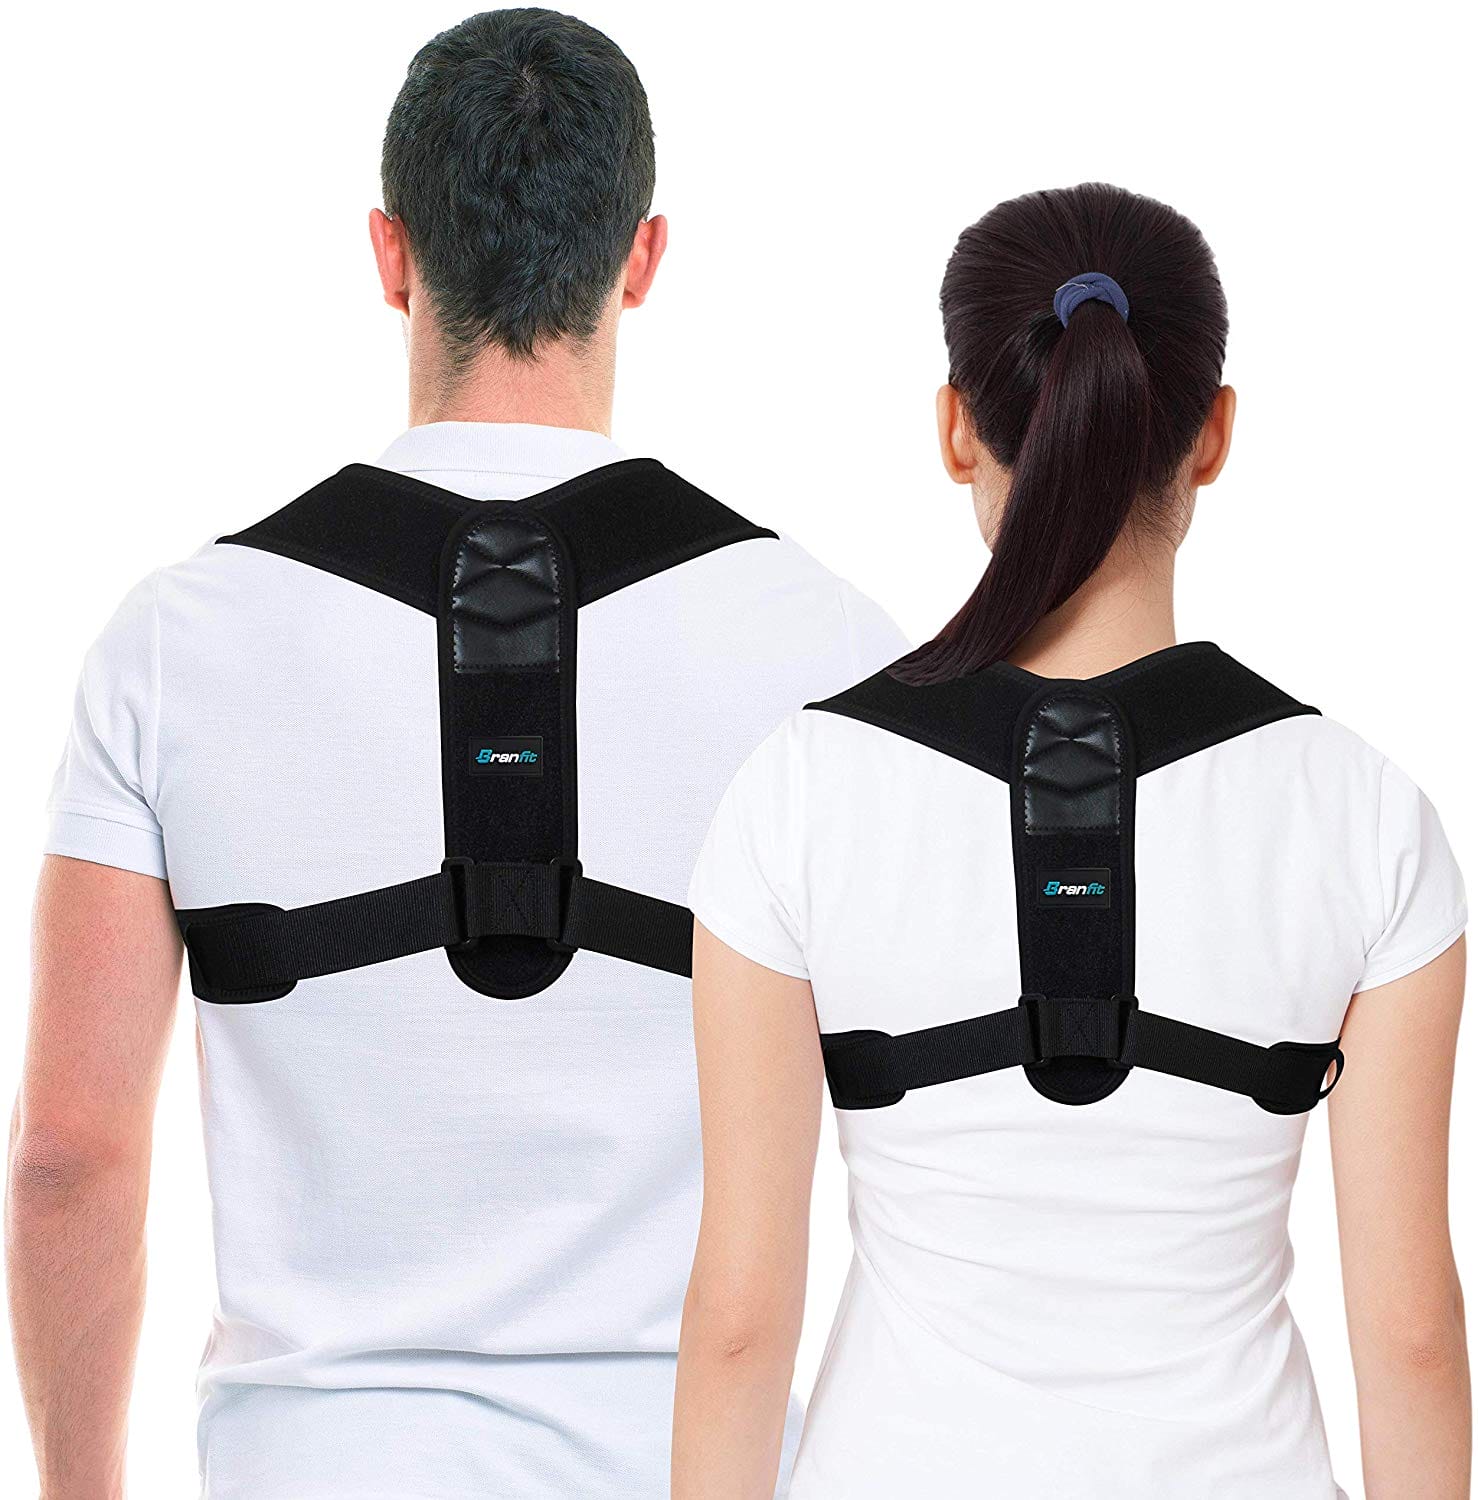 Branfit Posture Corrector - My Helpful Hints® Product Review